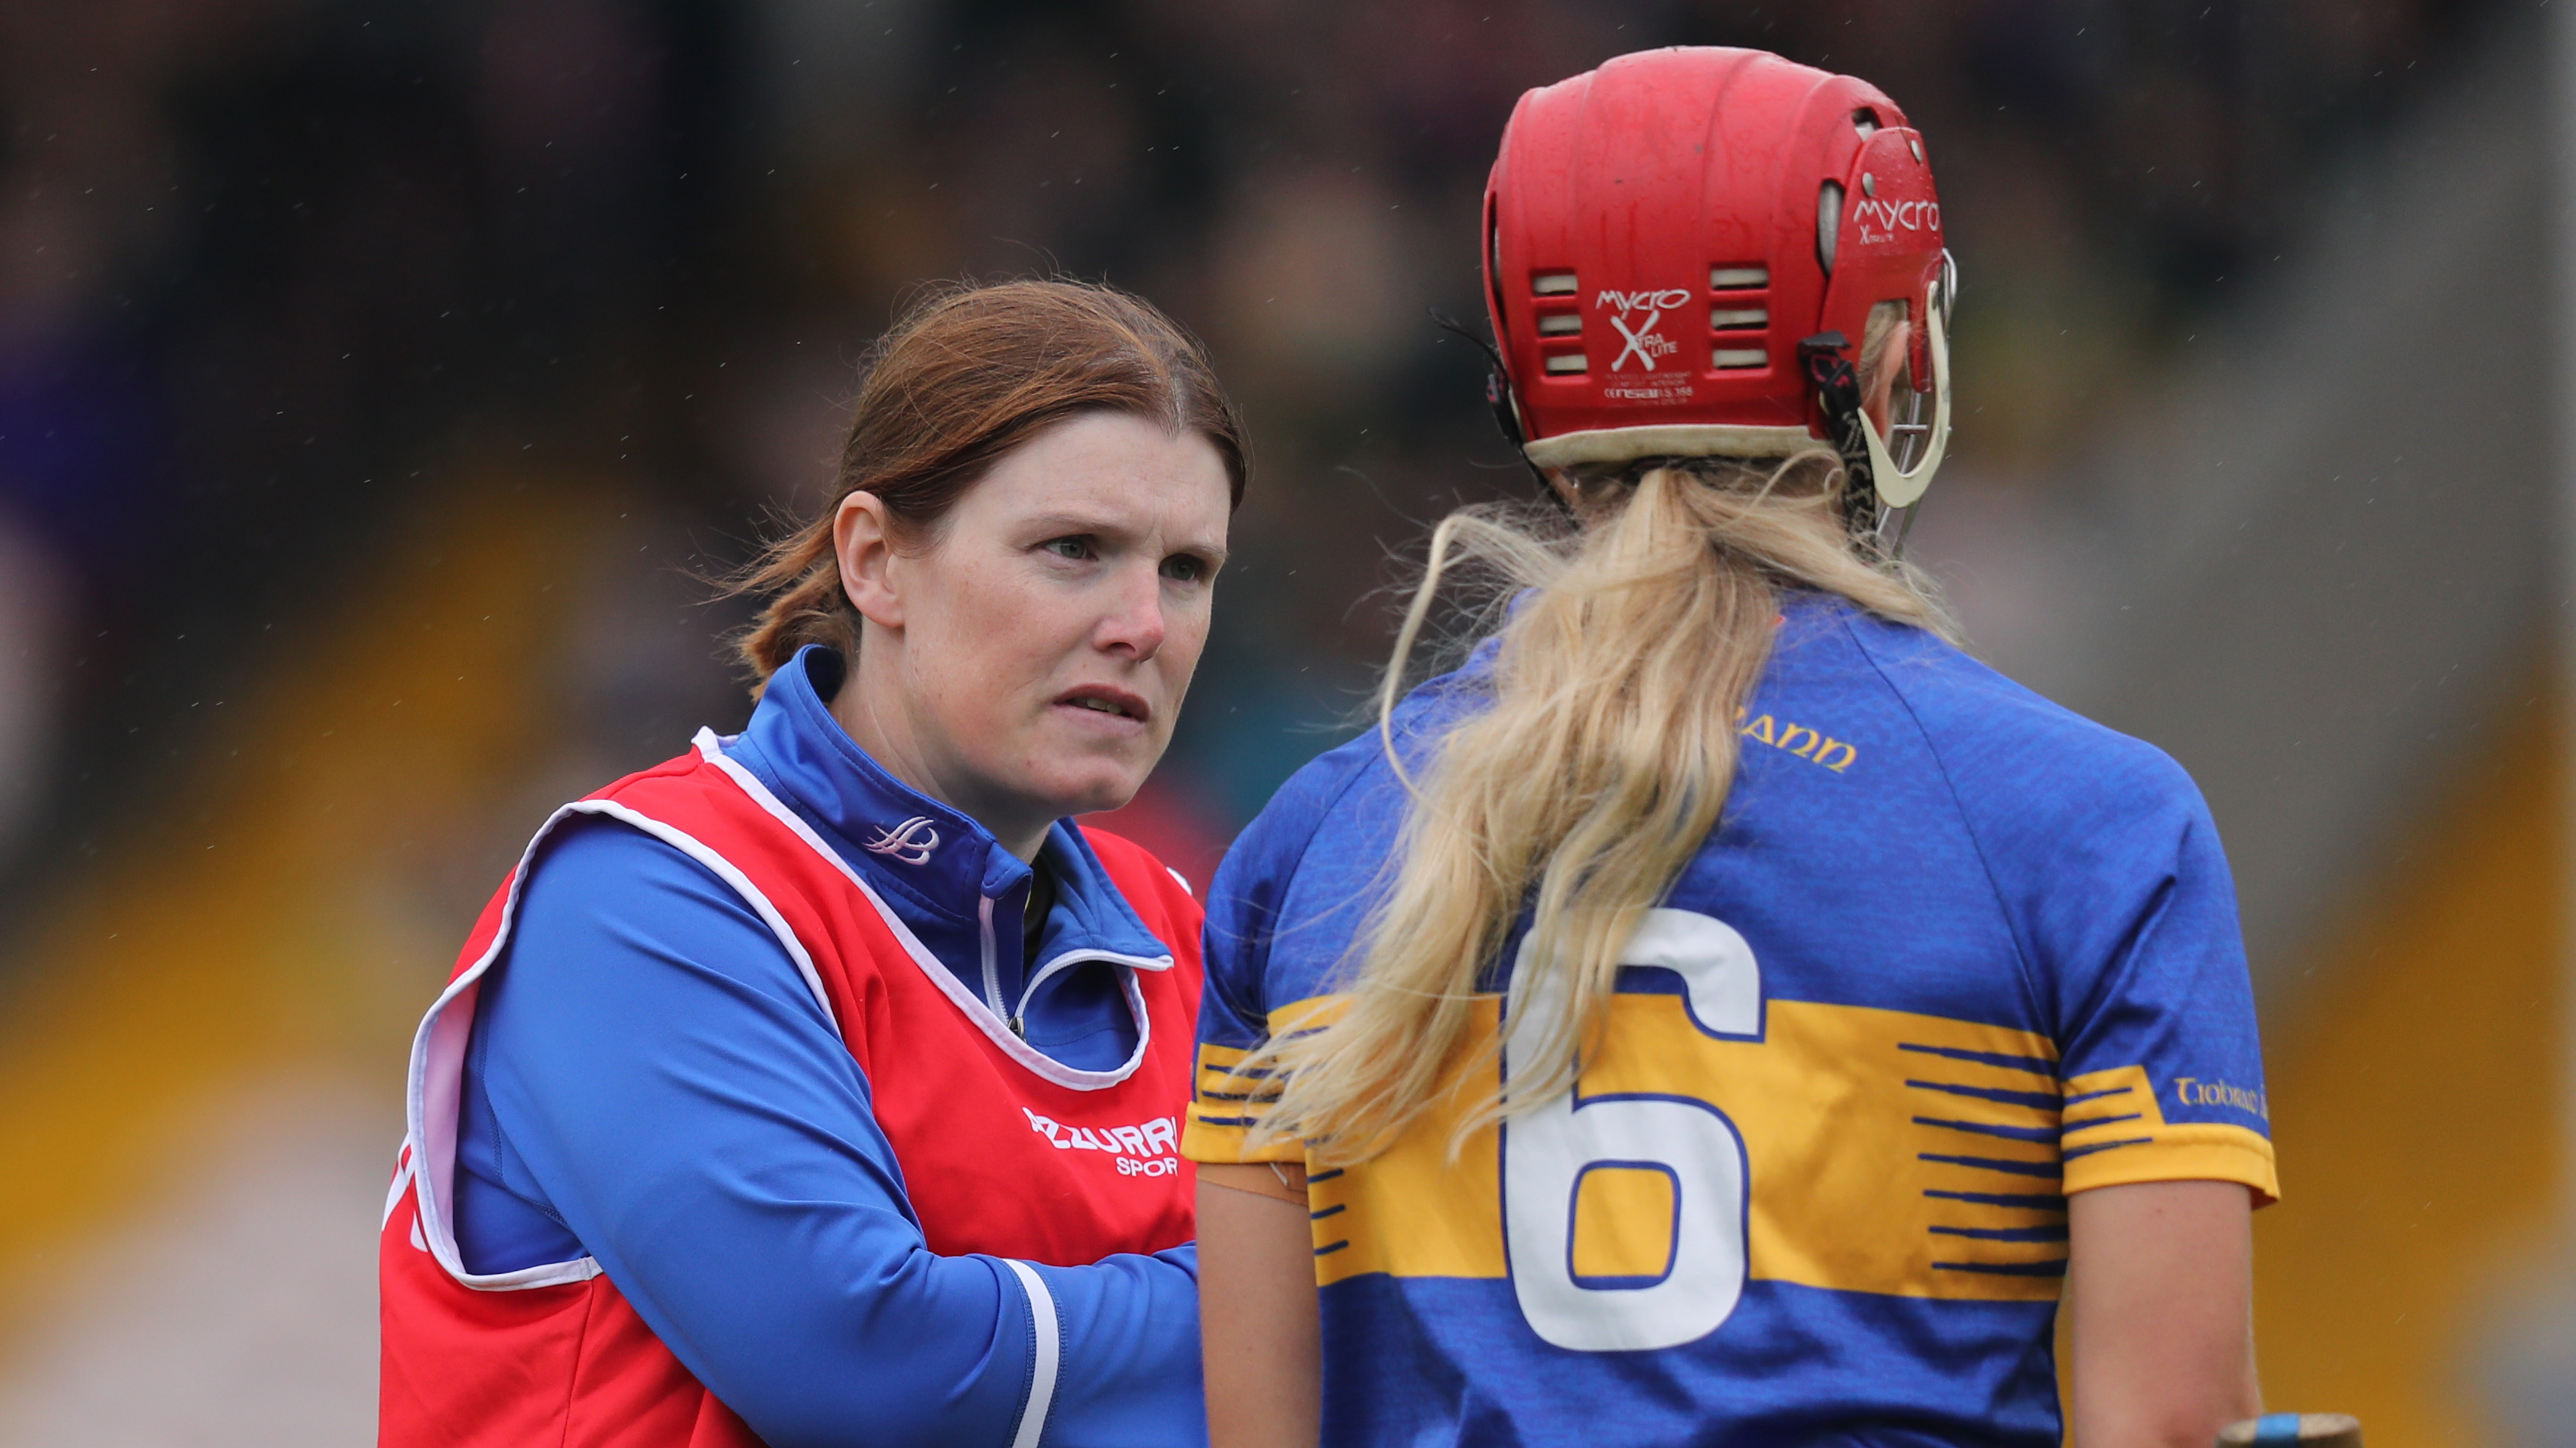 Interview with Tipperary Senior Camogie Manager Niamh Lillis